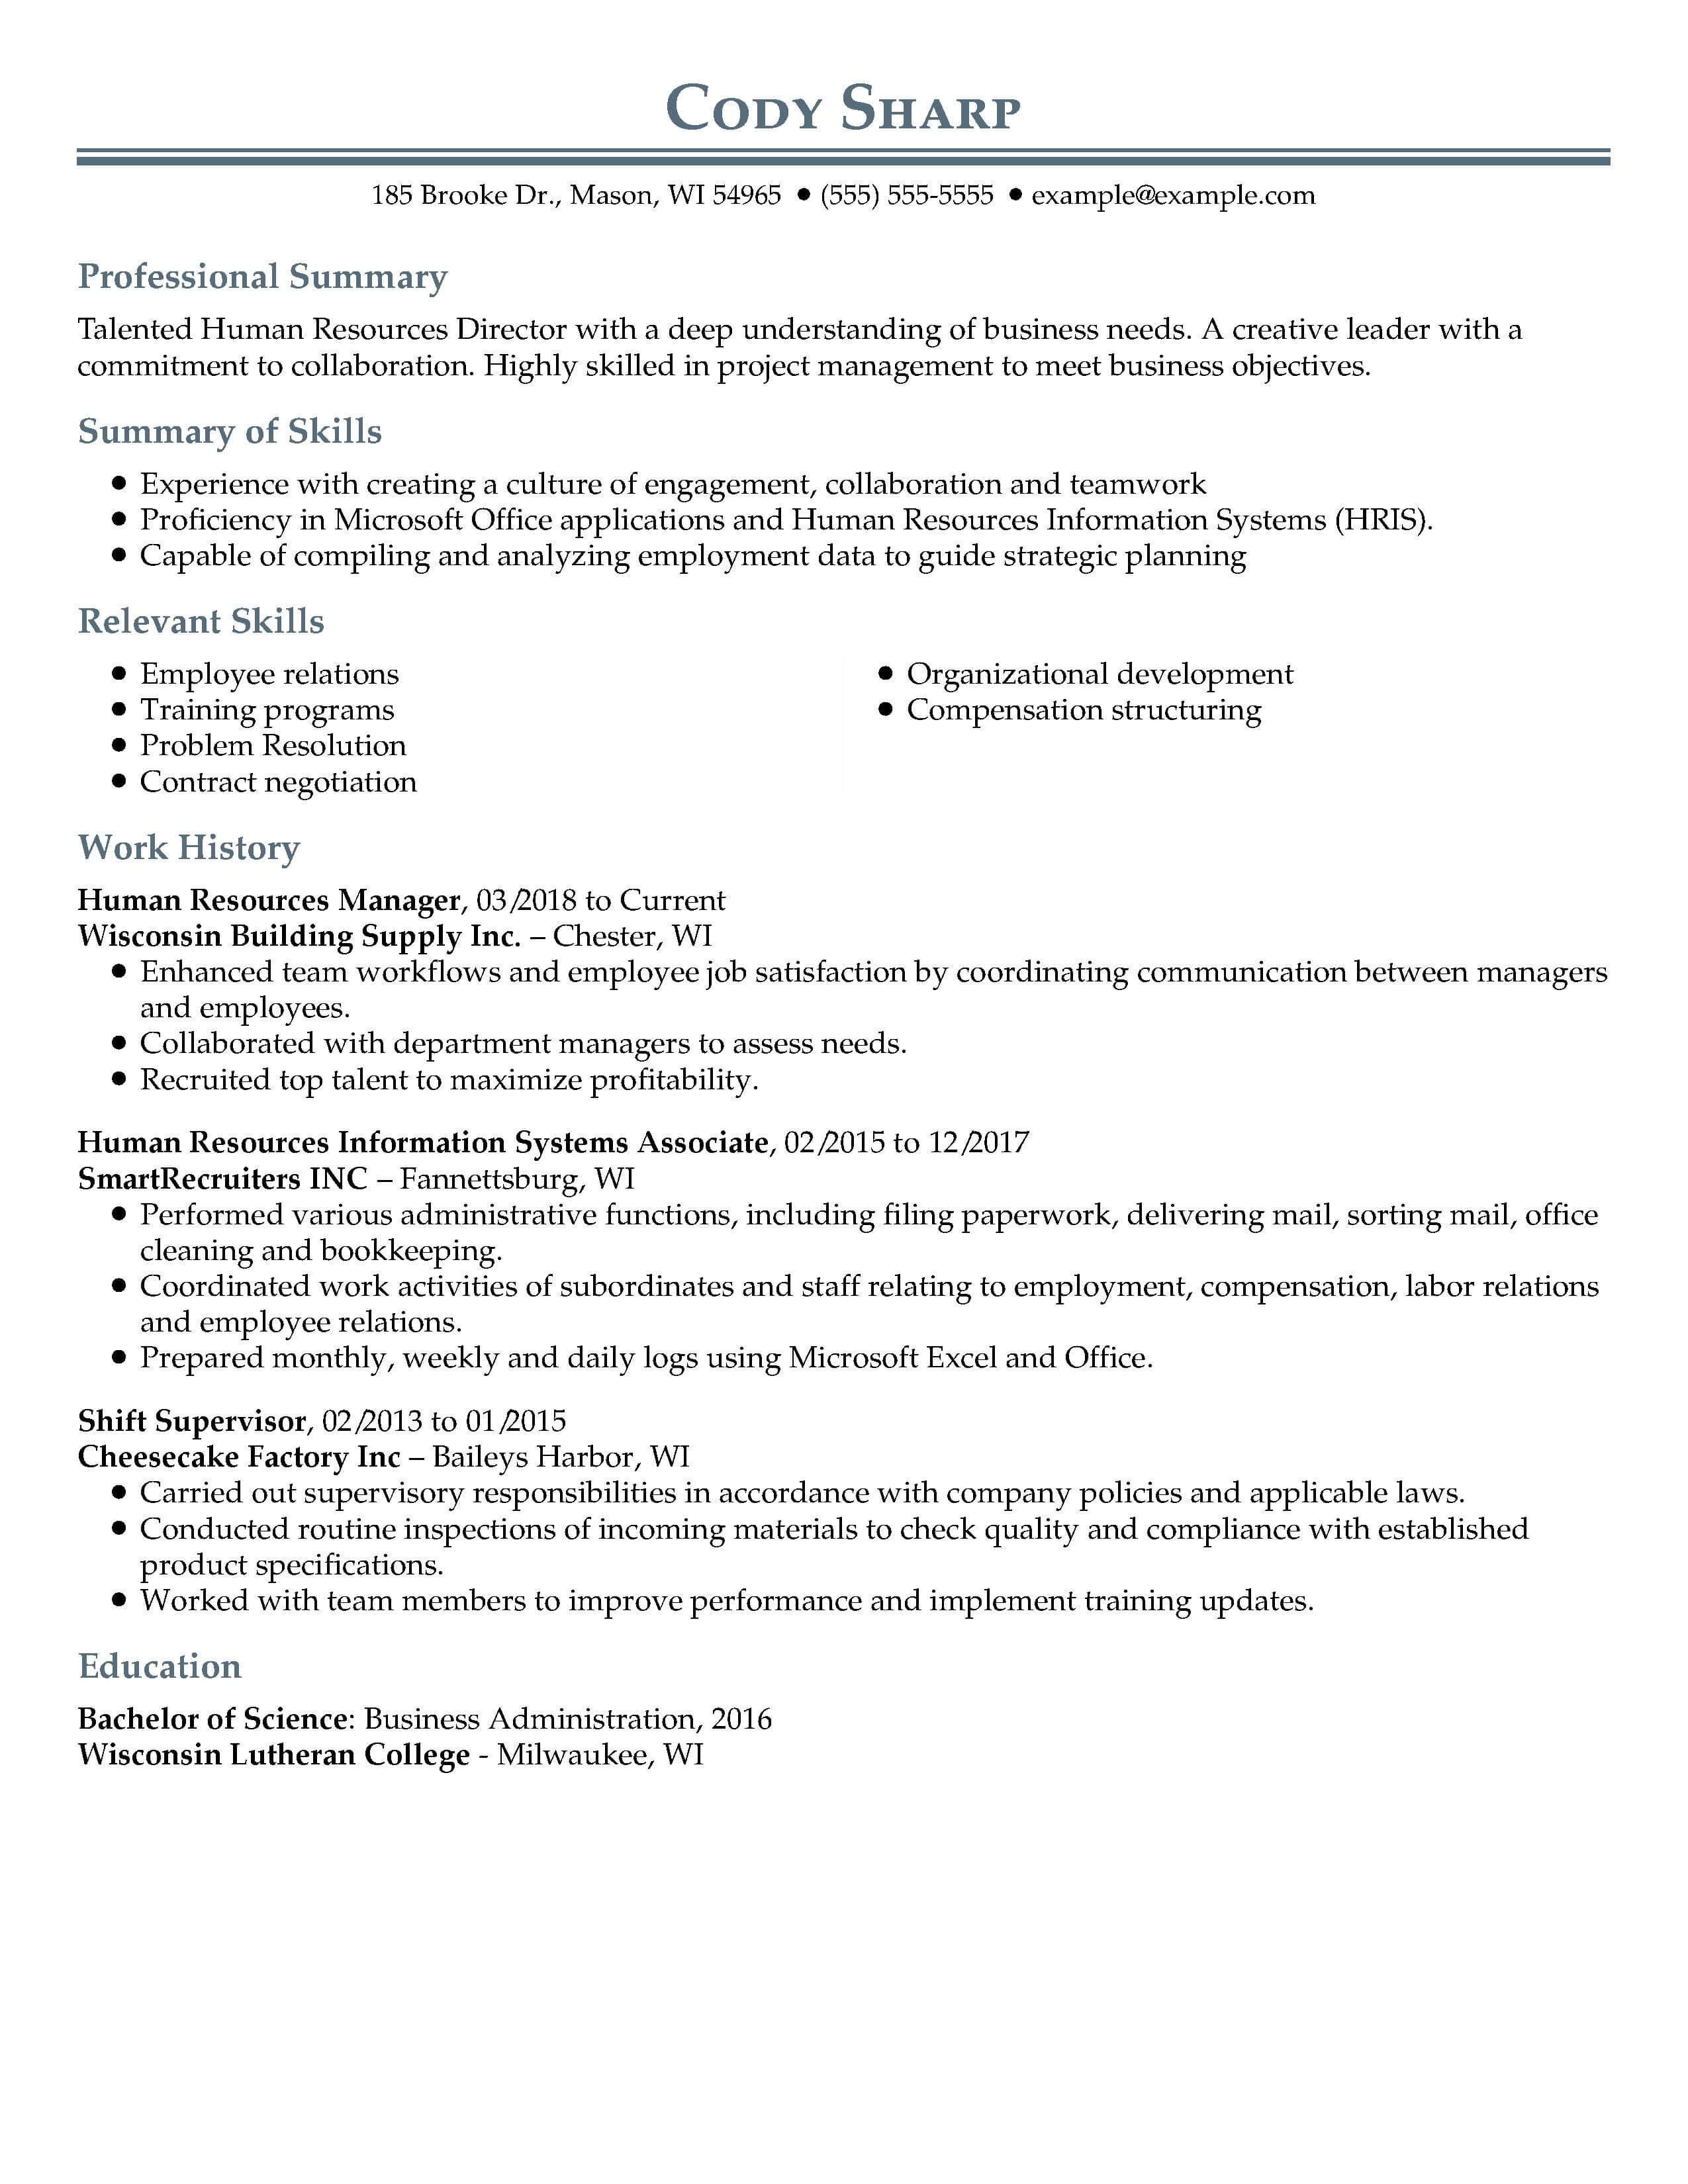 Professional Resume Examples Hr Combo Hrmanager professional resume examples|wikiresume.com